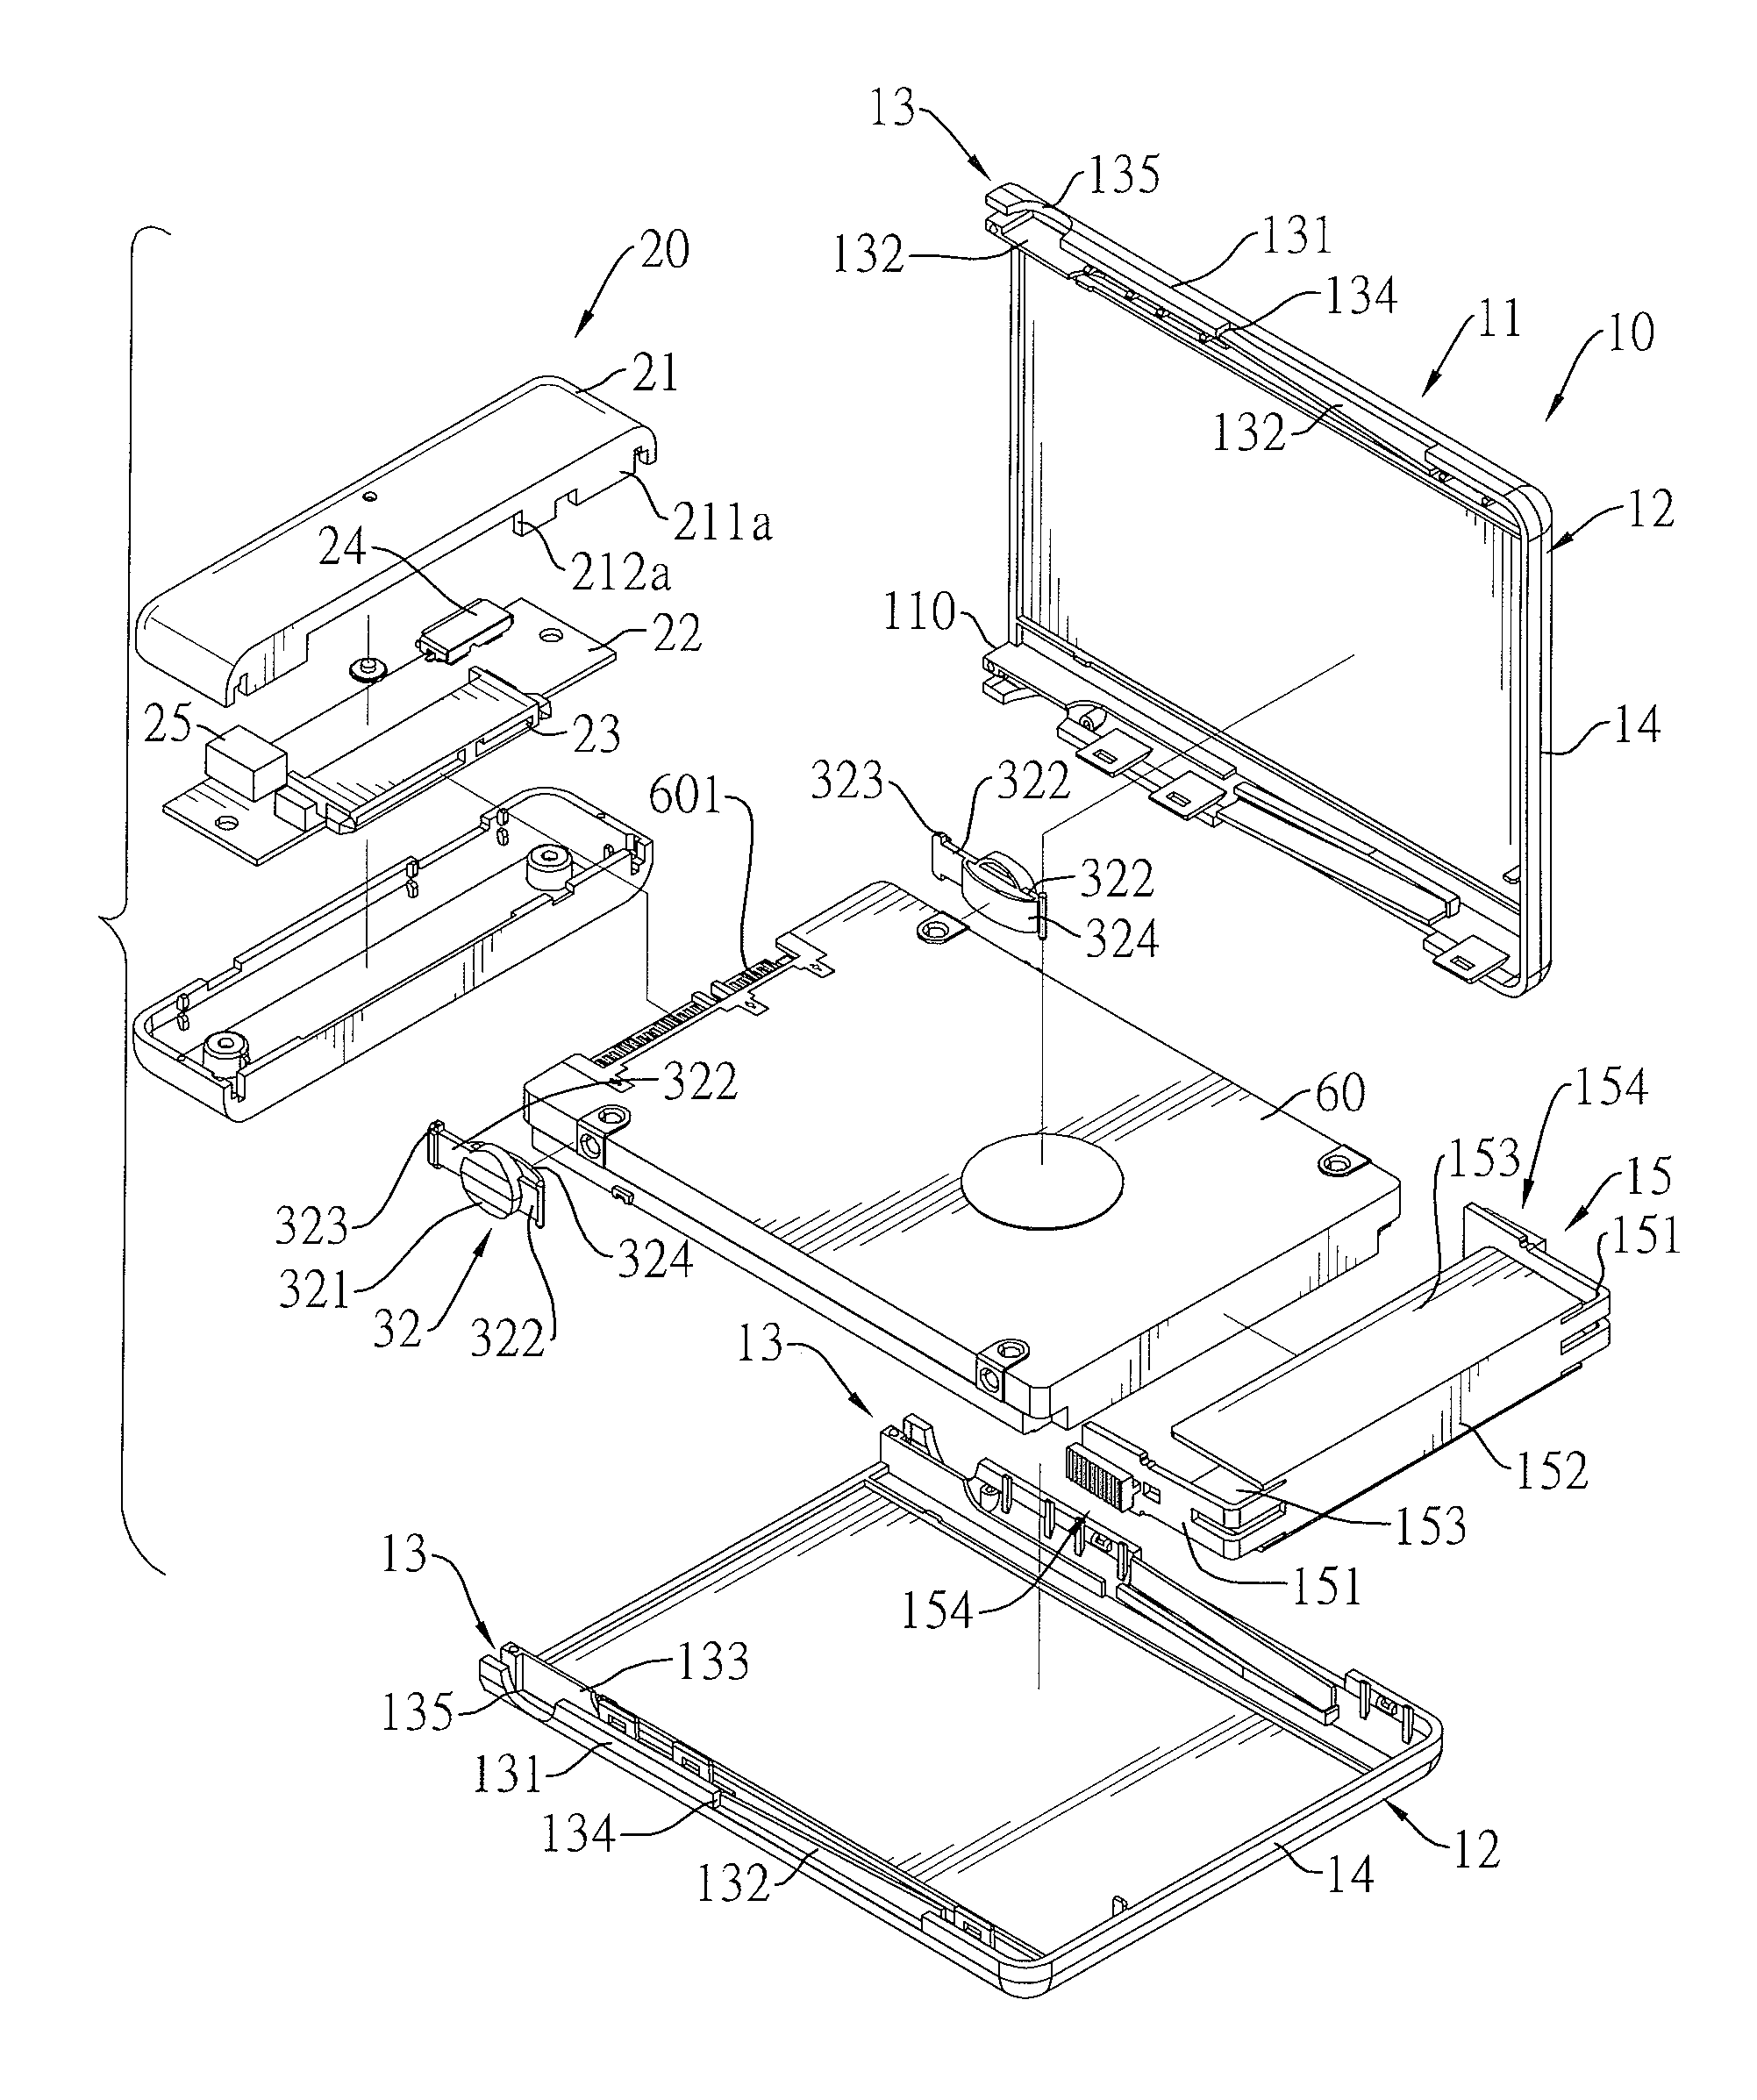 Detachable External Hard Drive Enclosure and Bridge Device Therefor